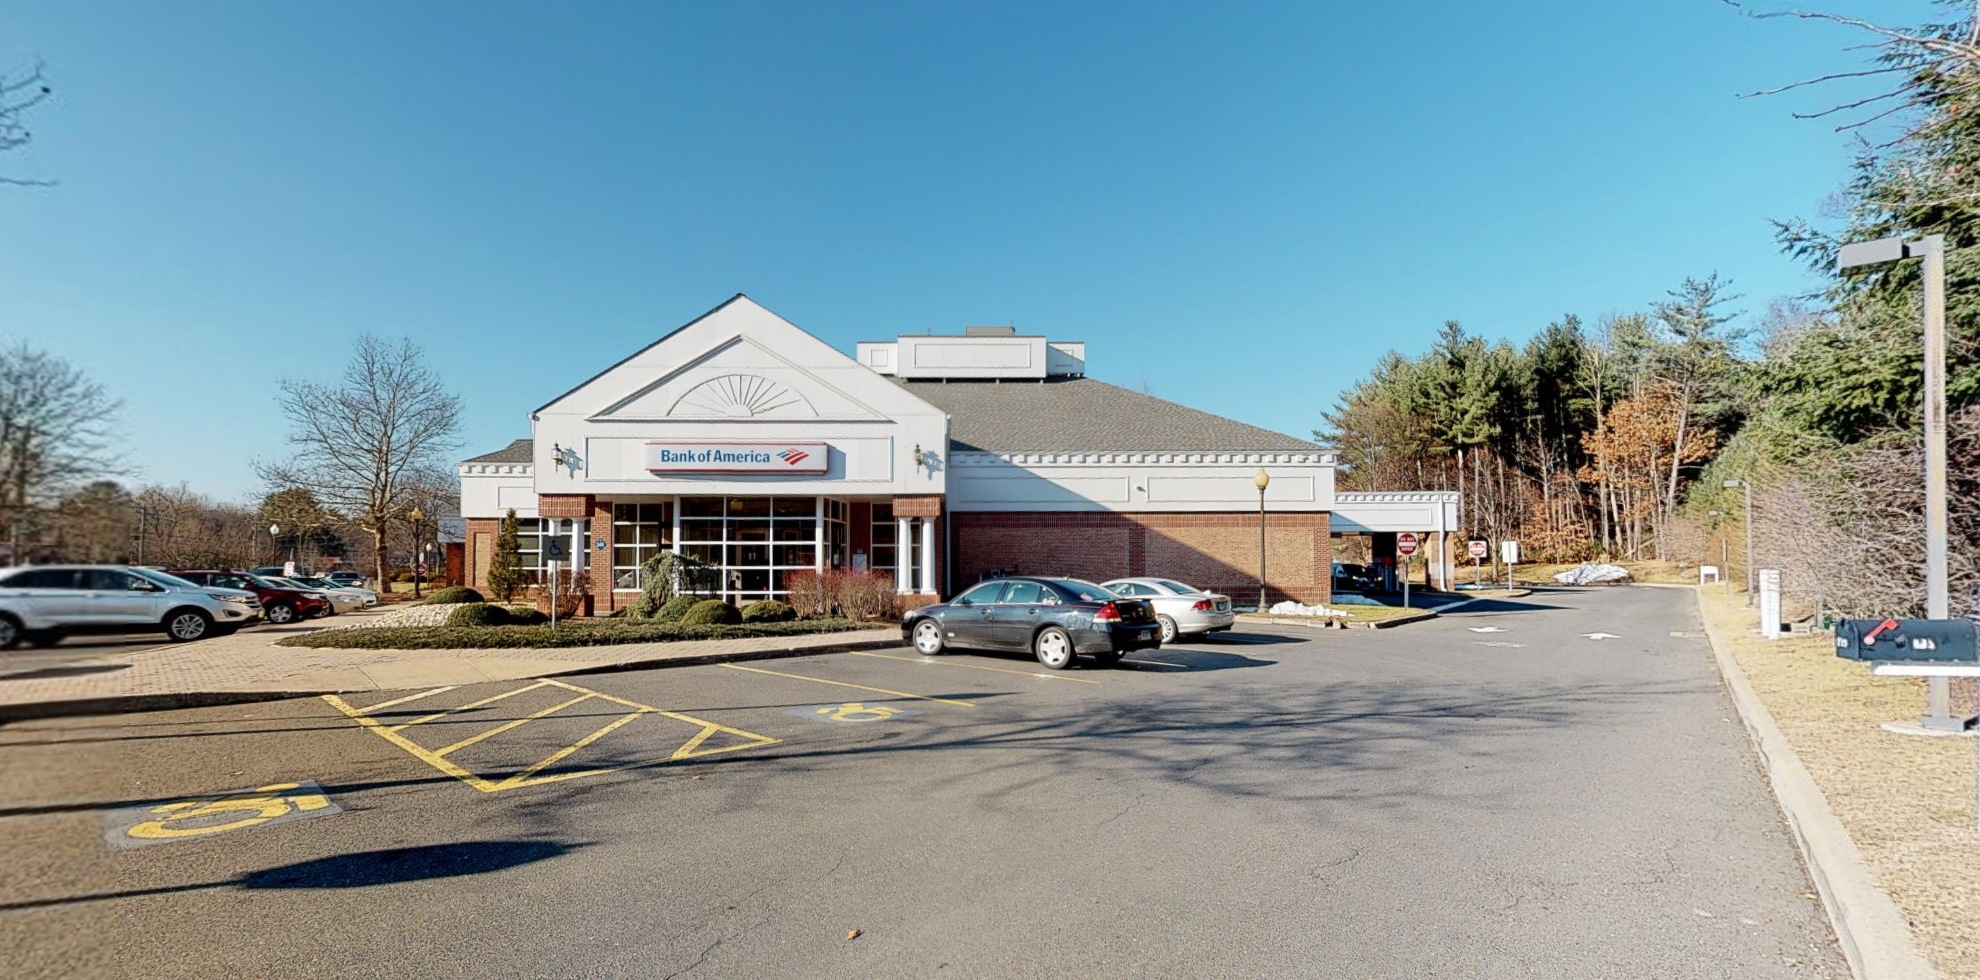 Bank of America financial center with drive-thru ATM | 240 W Main St, Avon, CT 06001